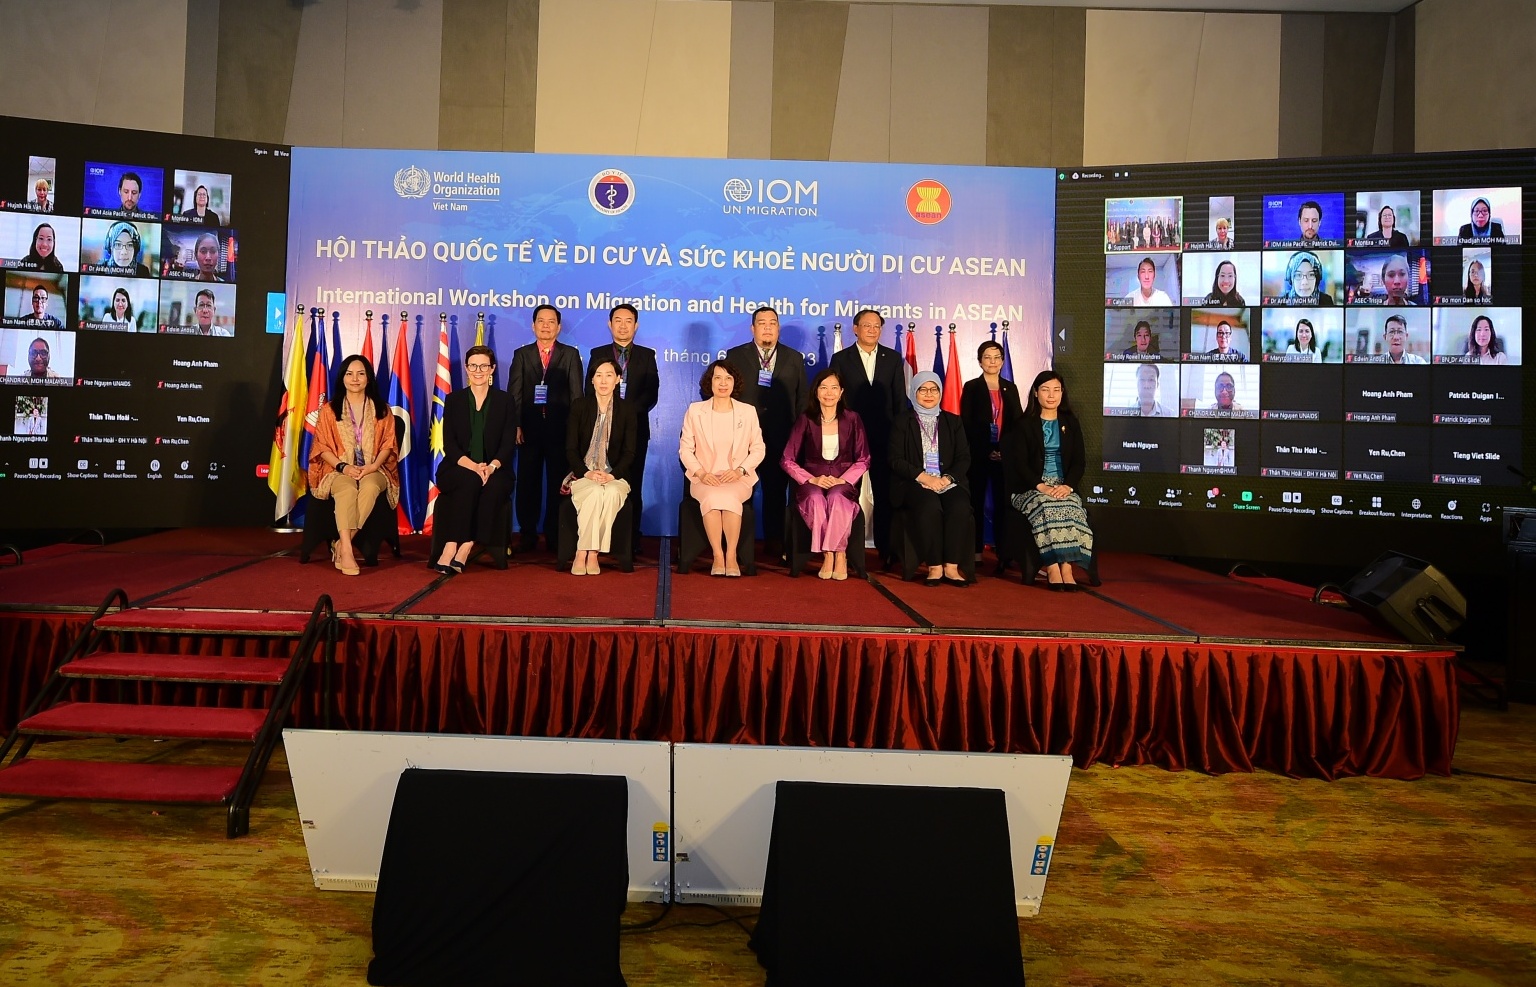 Cooperation to improve migrant health and well-being in ASEAN region